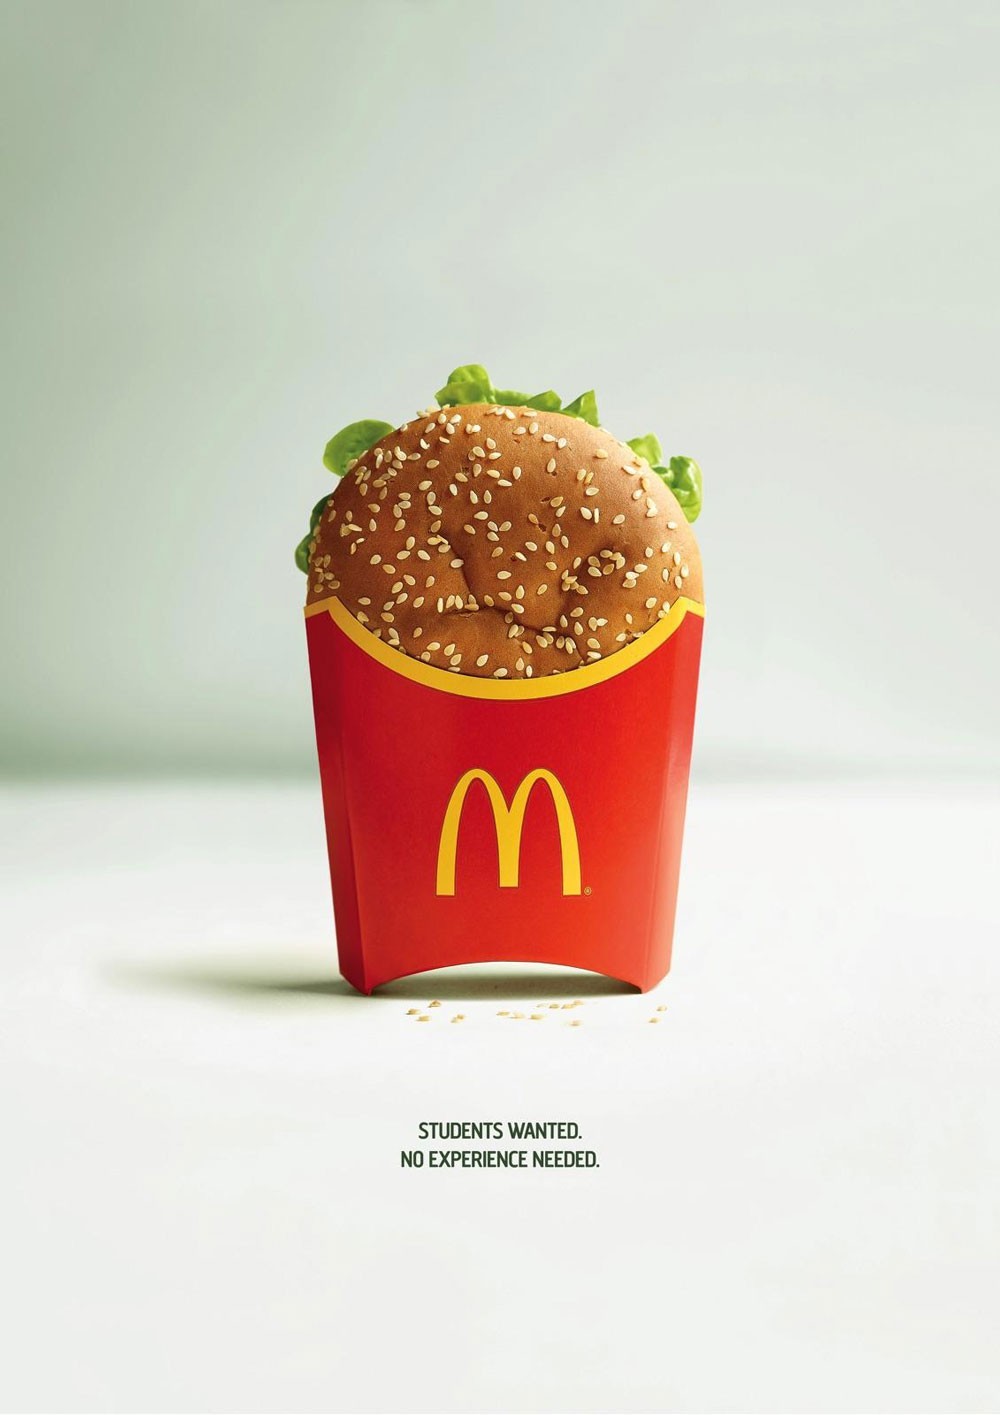 McDonalds 'students wanted' recruitment poster